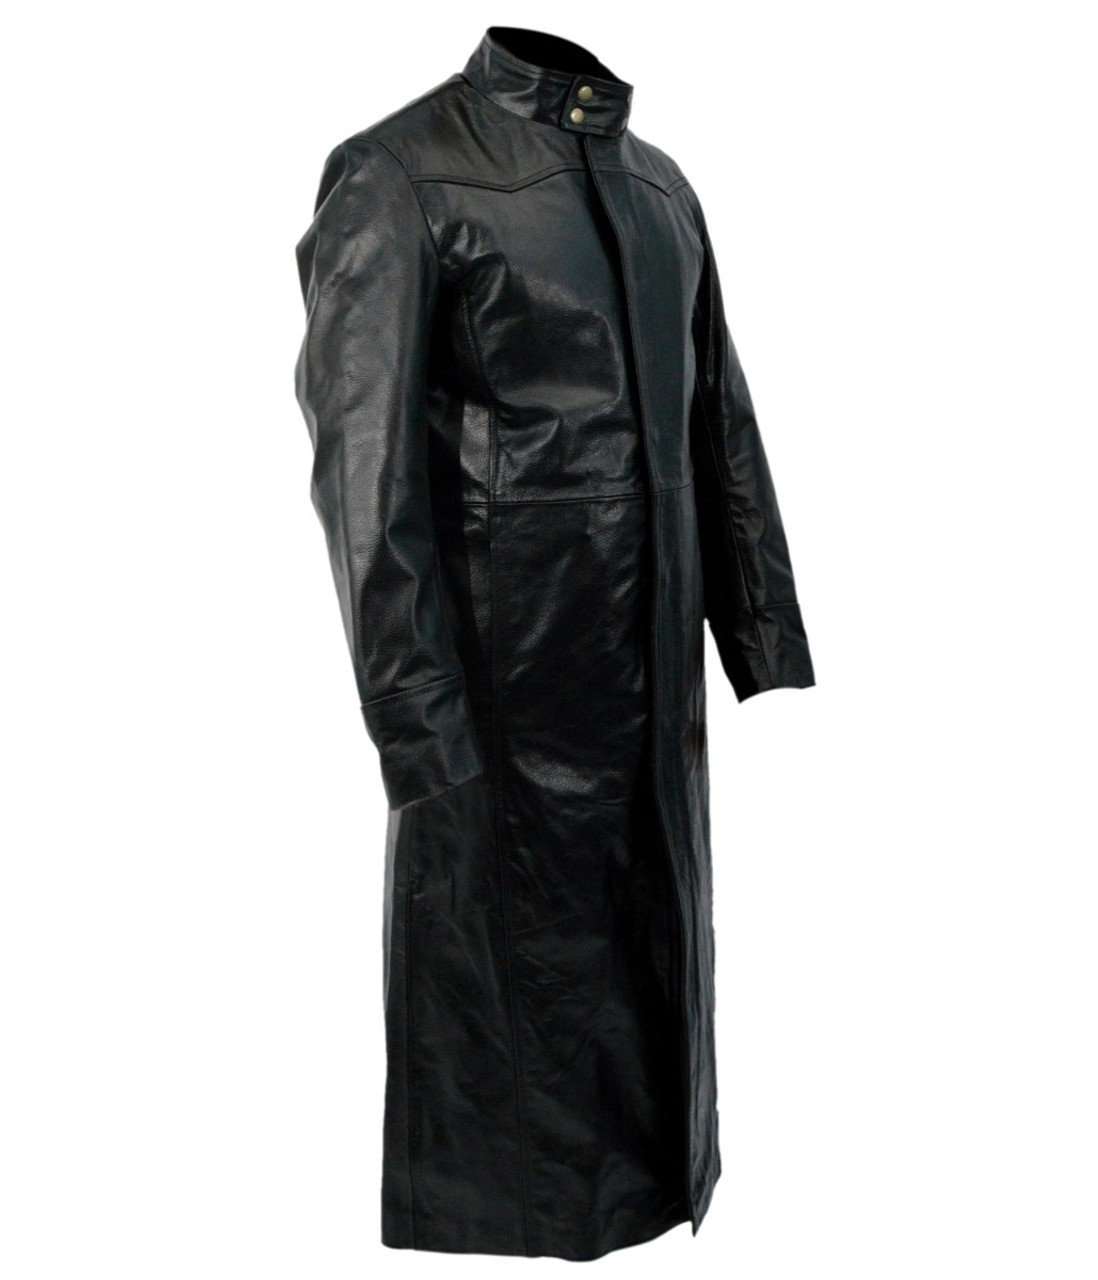 Neo Matrix Keanu Reeves Black Leather Trench Coat | Feather Skin